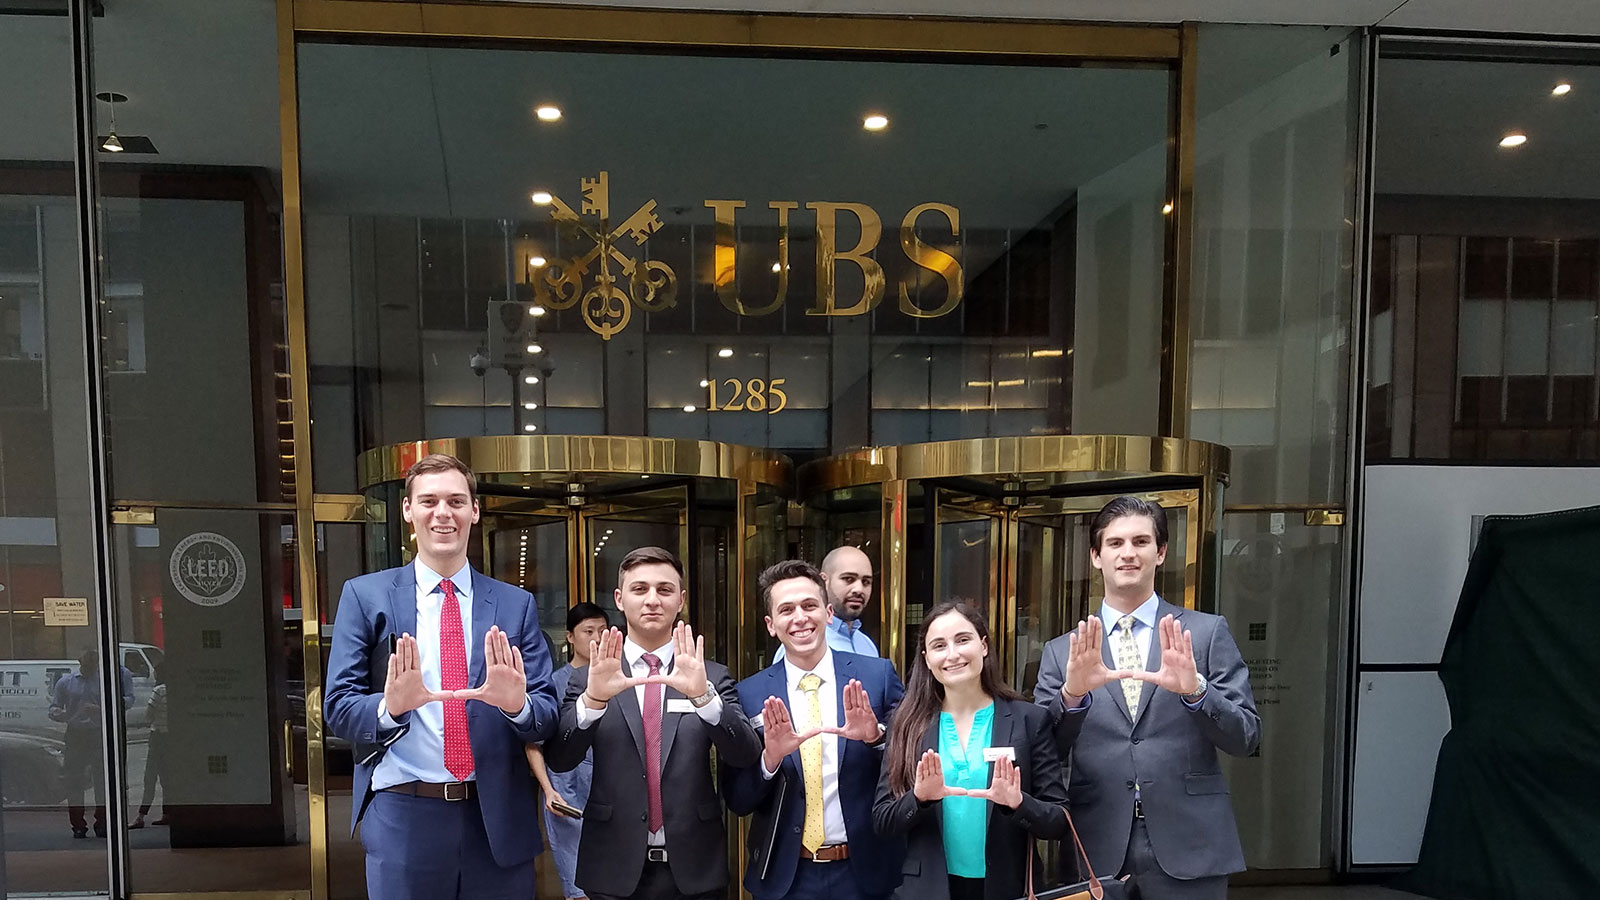 'Canes Storm New York for an Up-Close Look at Careers in Finance, Real Estate and Marketing